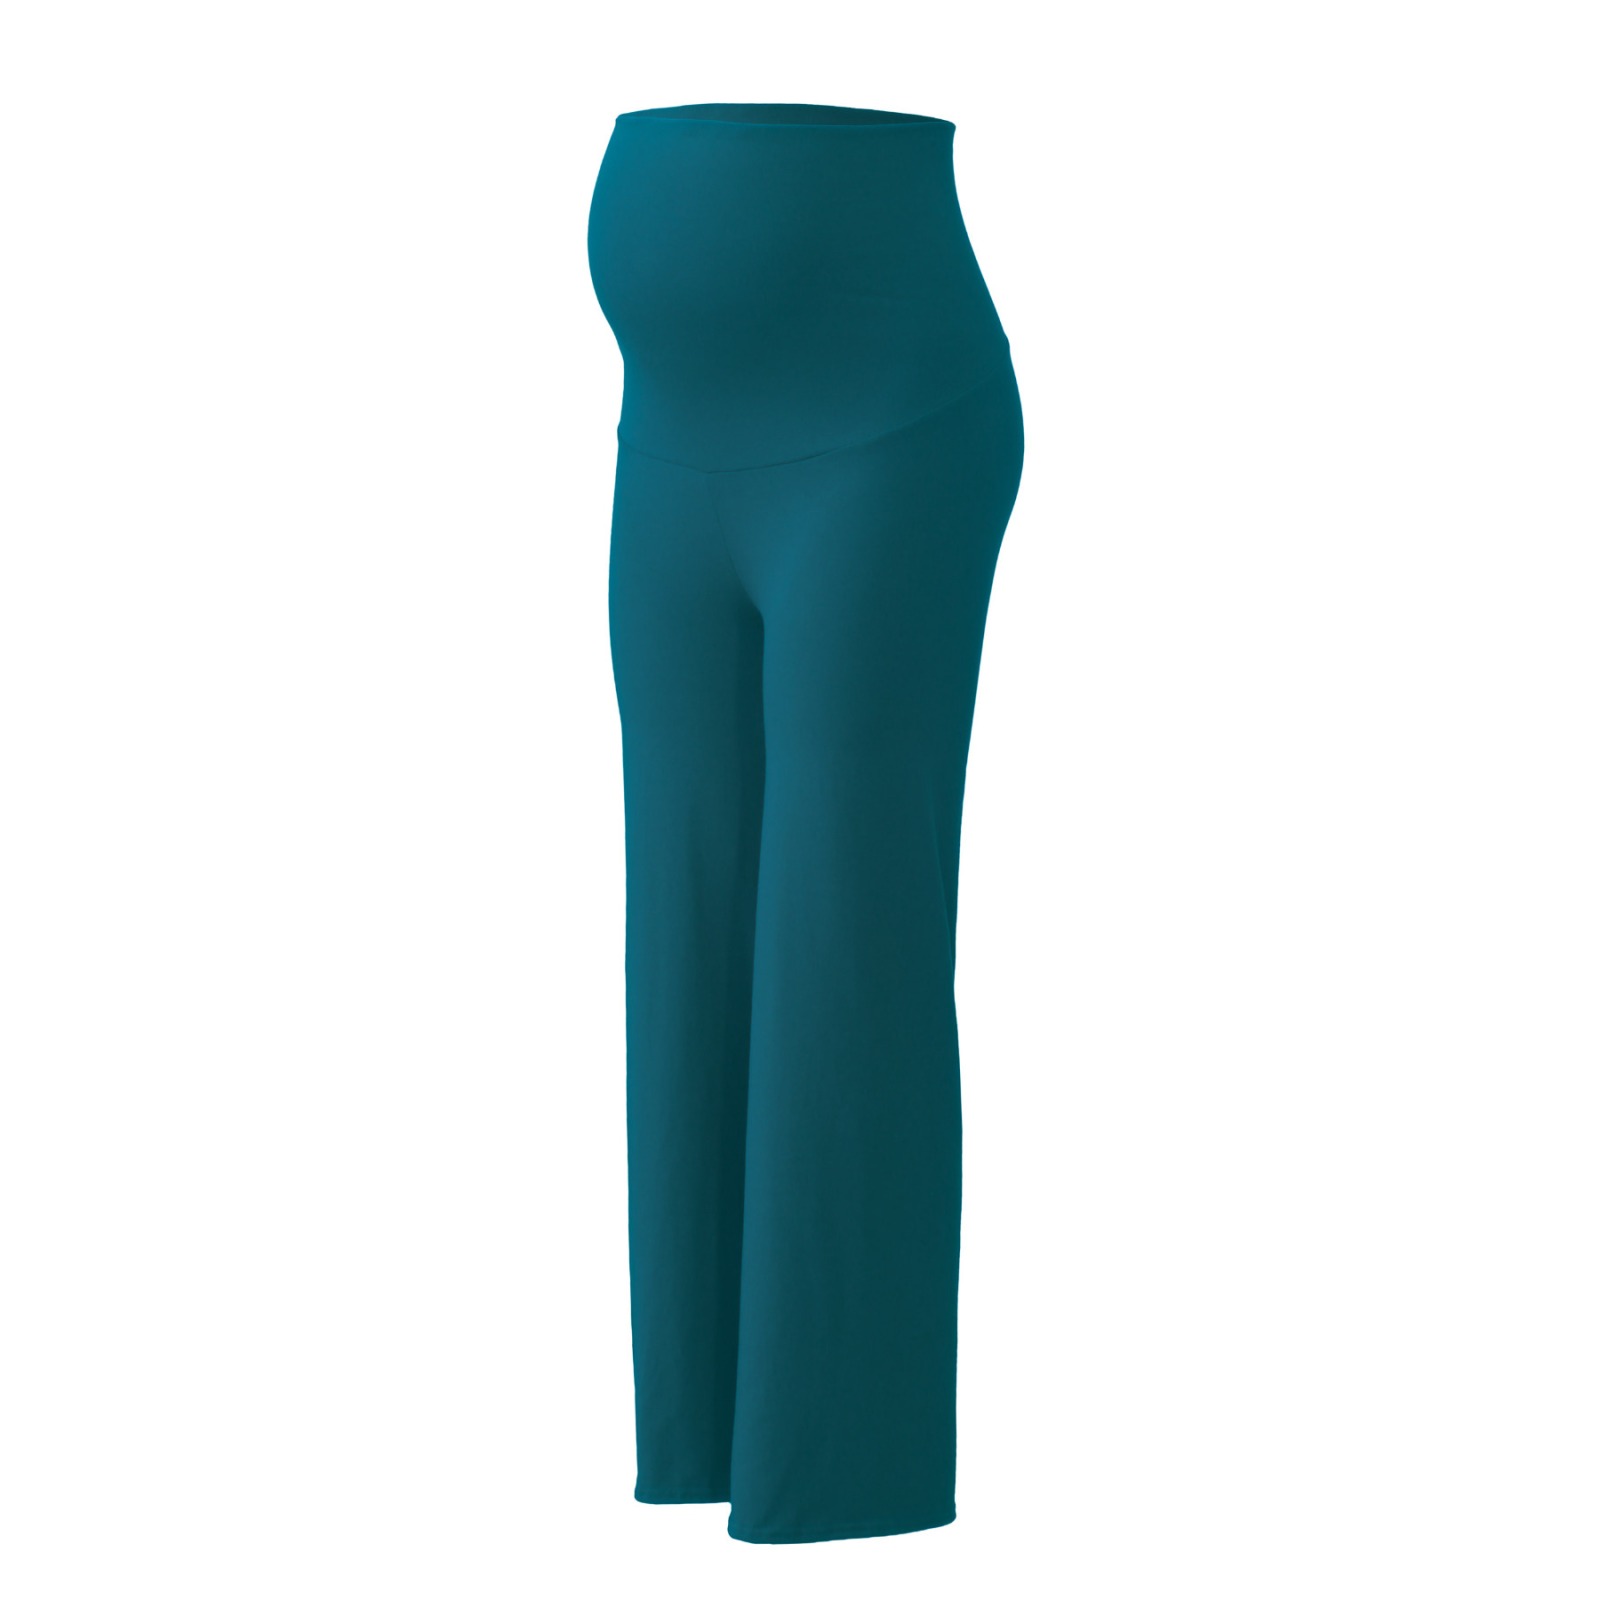 Mama Yoga pants Relaxed Fit teal blue